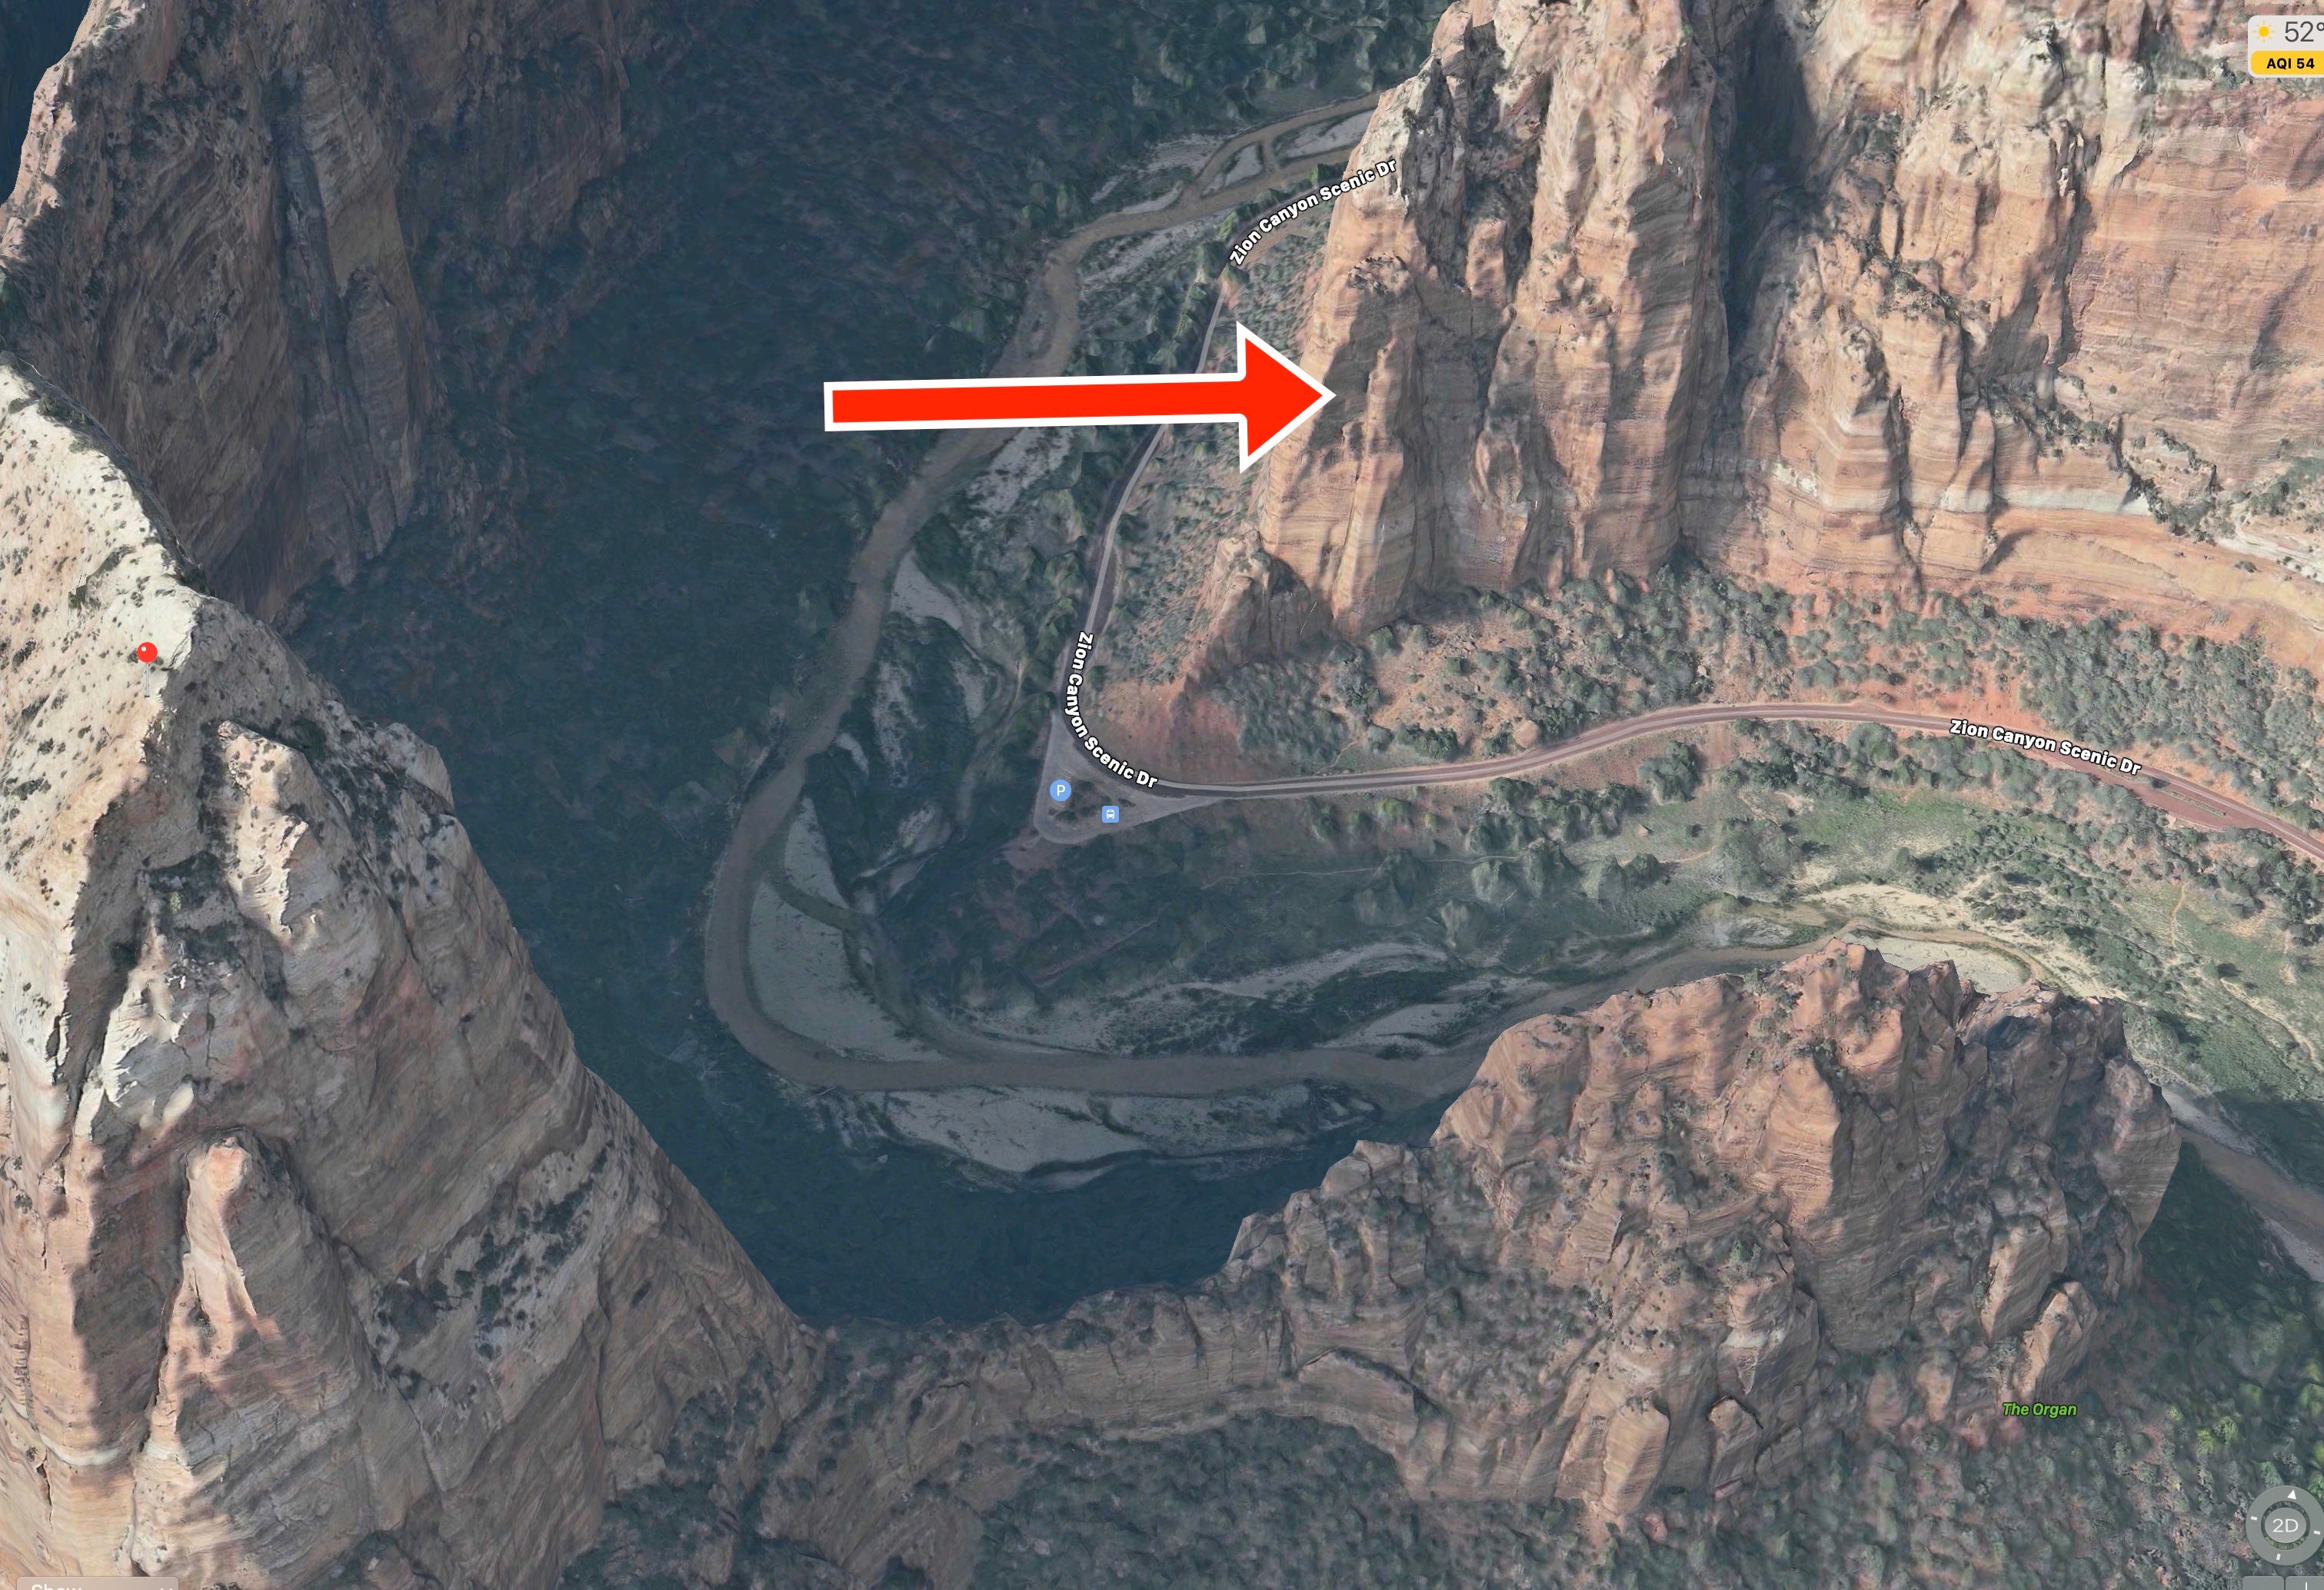 Red arrow points to the area where I was going to climb.